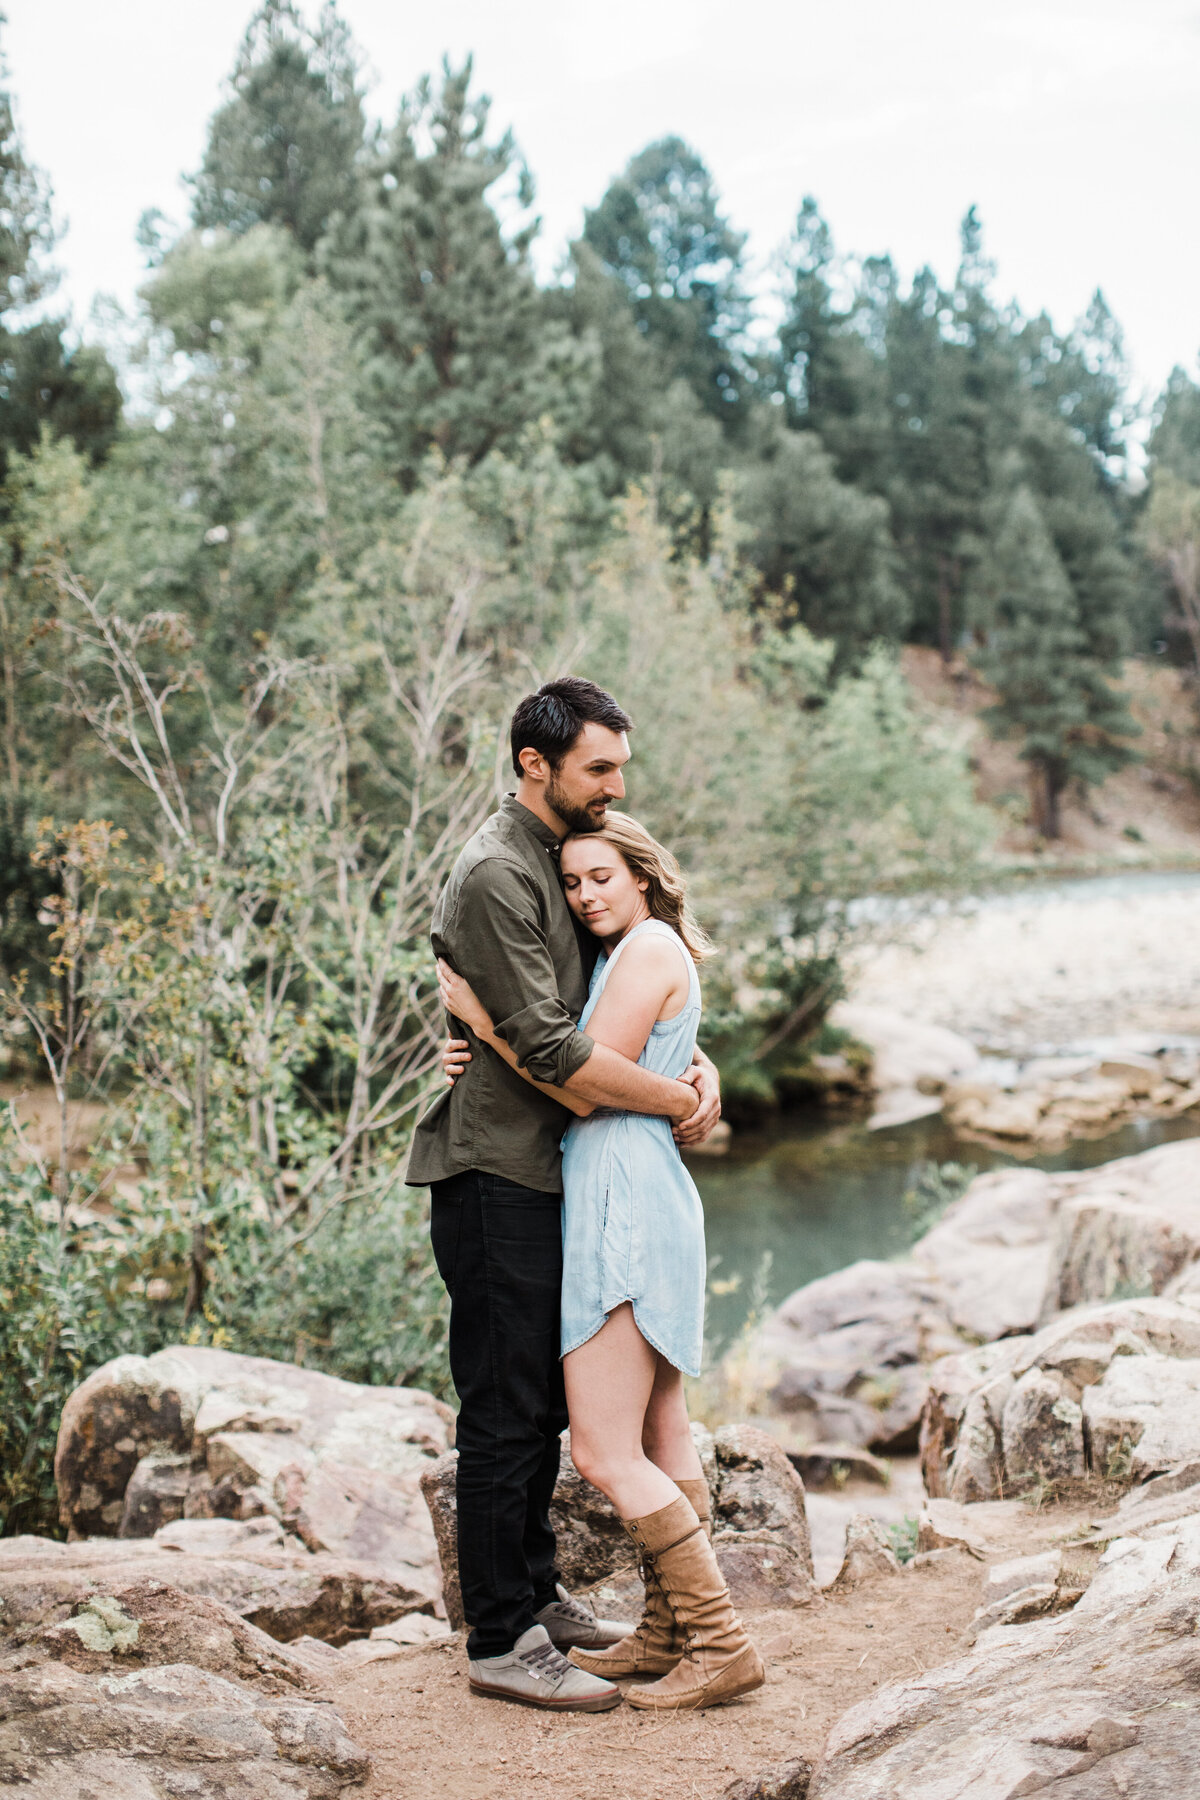 A couple holding each other close in front of the Animas River during their engagement session in Durango, Colorado. The woman on the right is wearing a short blue dress and boots while the man on the left is wearing a dark green dress shirt and dark pants. Behind the river are many trees and other greenery.